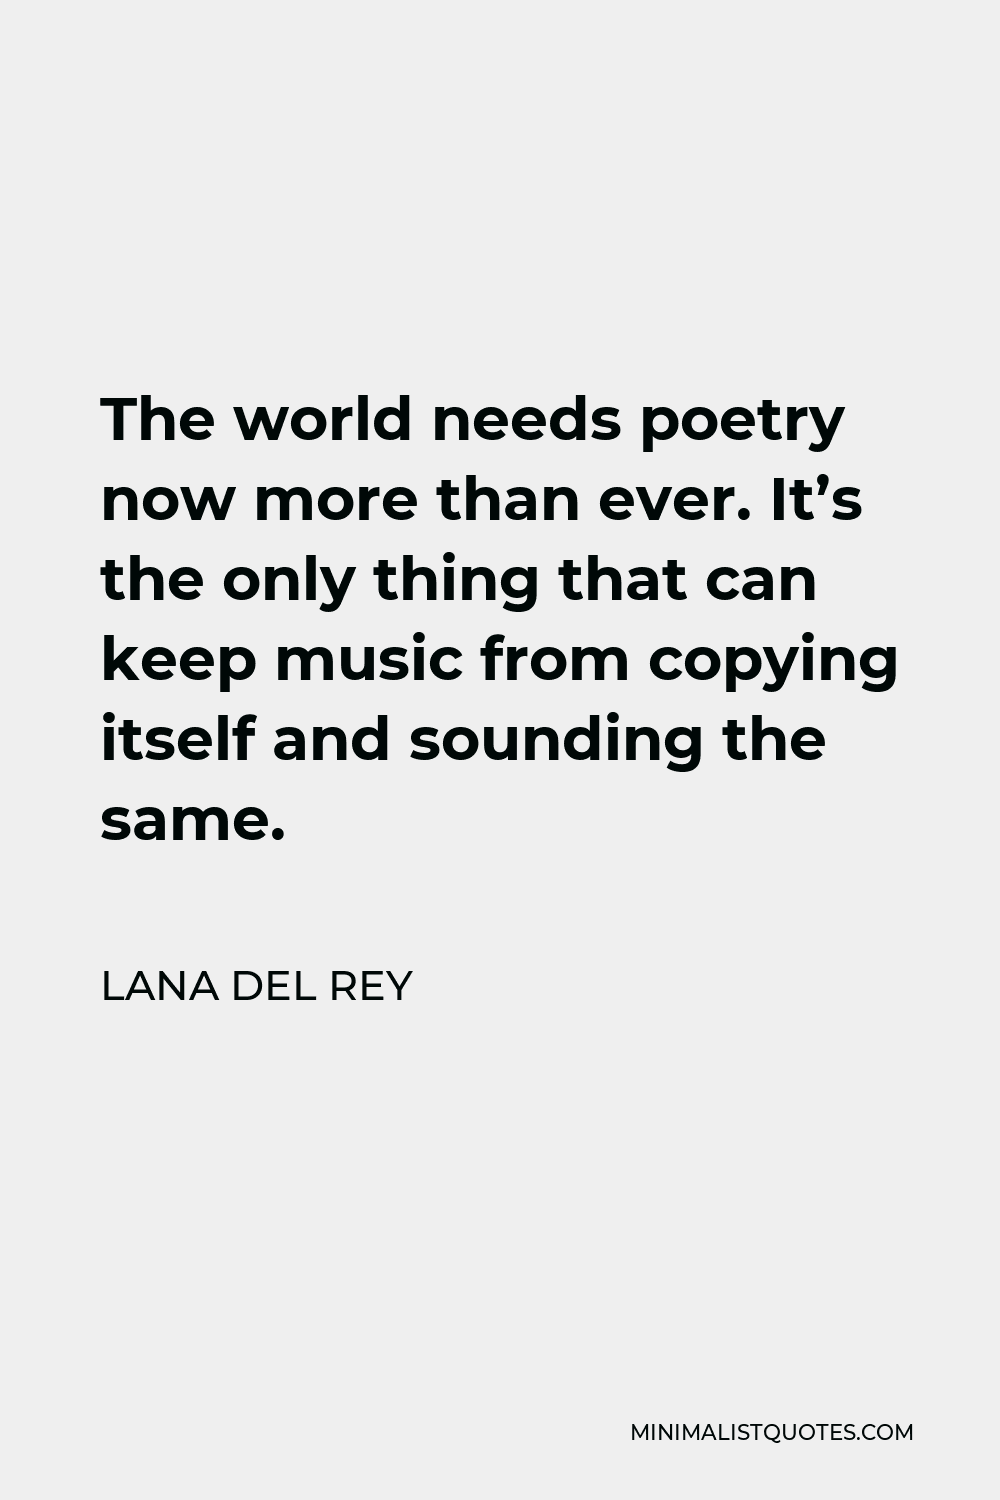 Lana Del Rey Quote - The world needs poetry now more than ever. It’s the only thing that can keep music from copying itself and sounding the same.